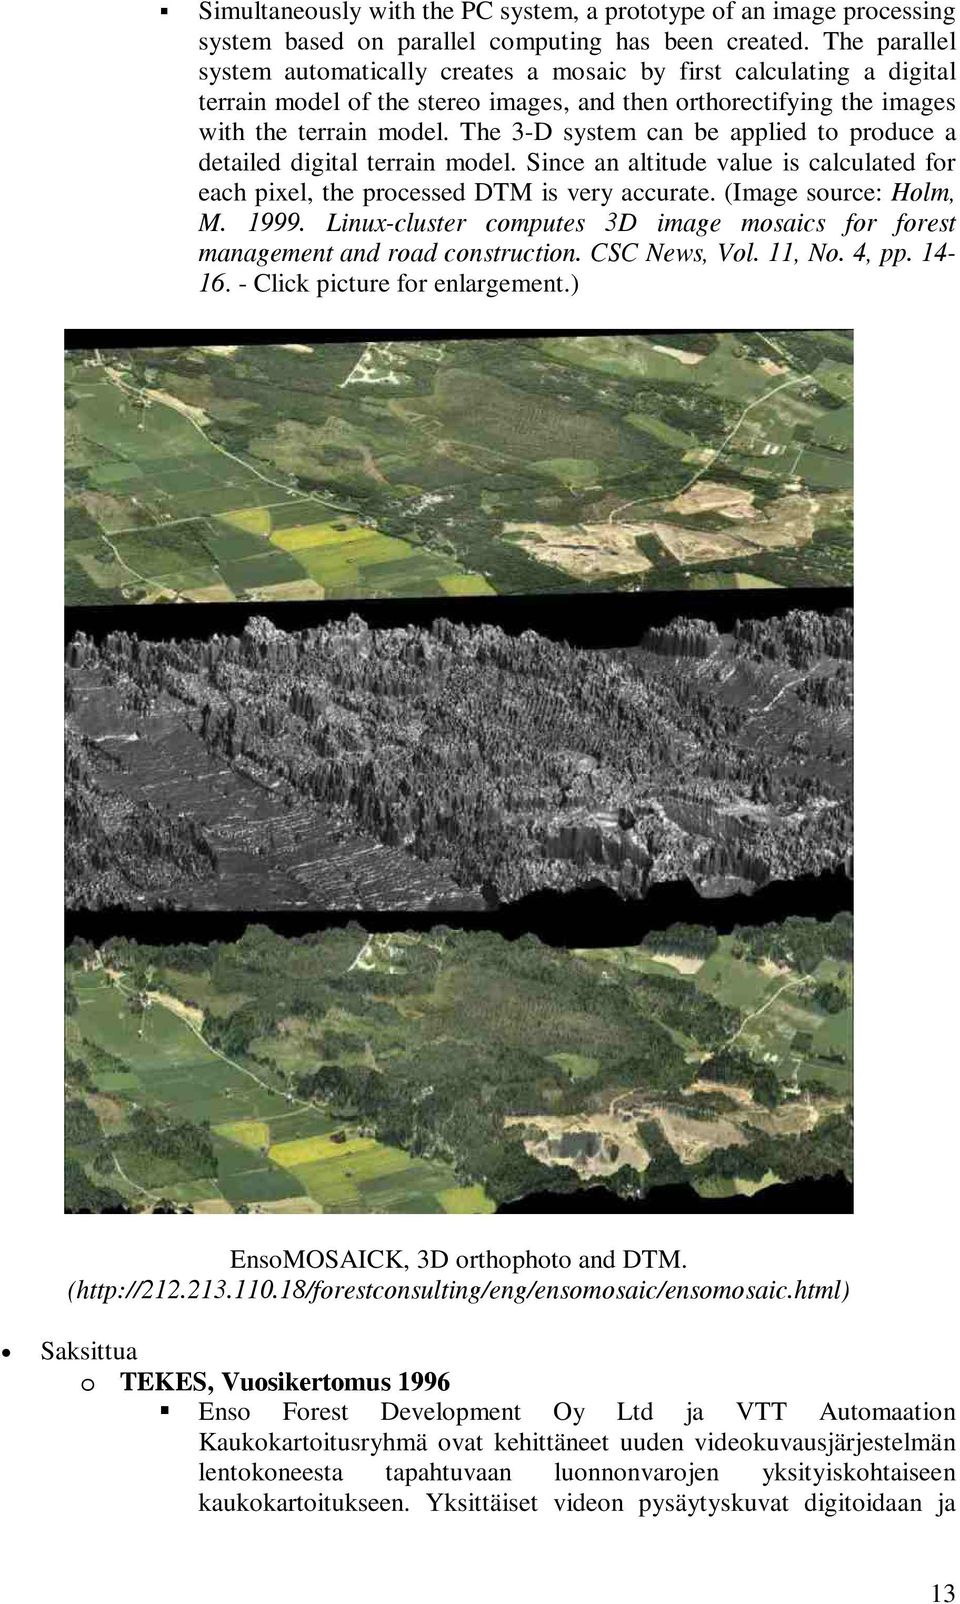 The 3-D system can be applied to produce a detailed digital terrain model. Since an altitude value is calculated for each pixel, the processed DTM is very accurate. (Image source: Holm, M. 1999.